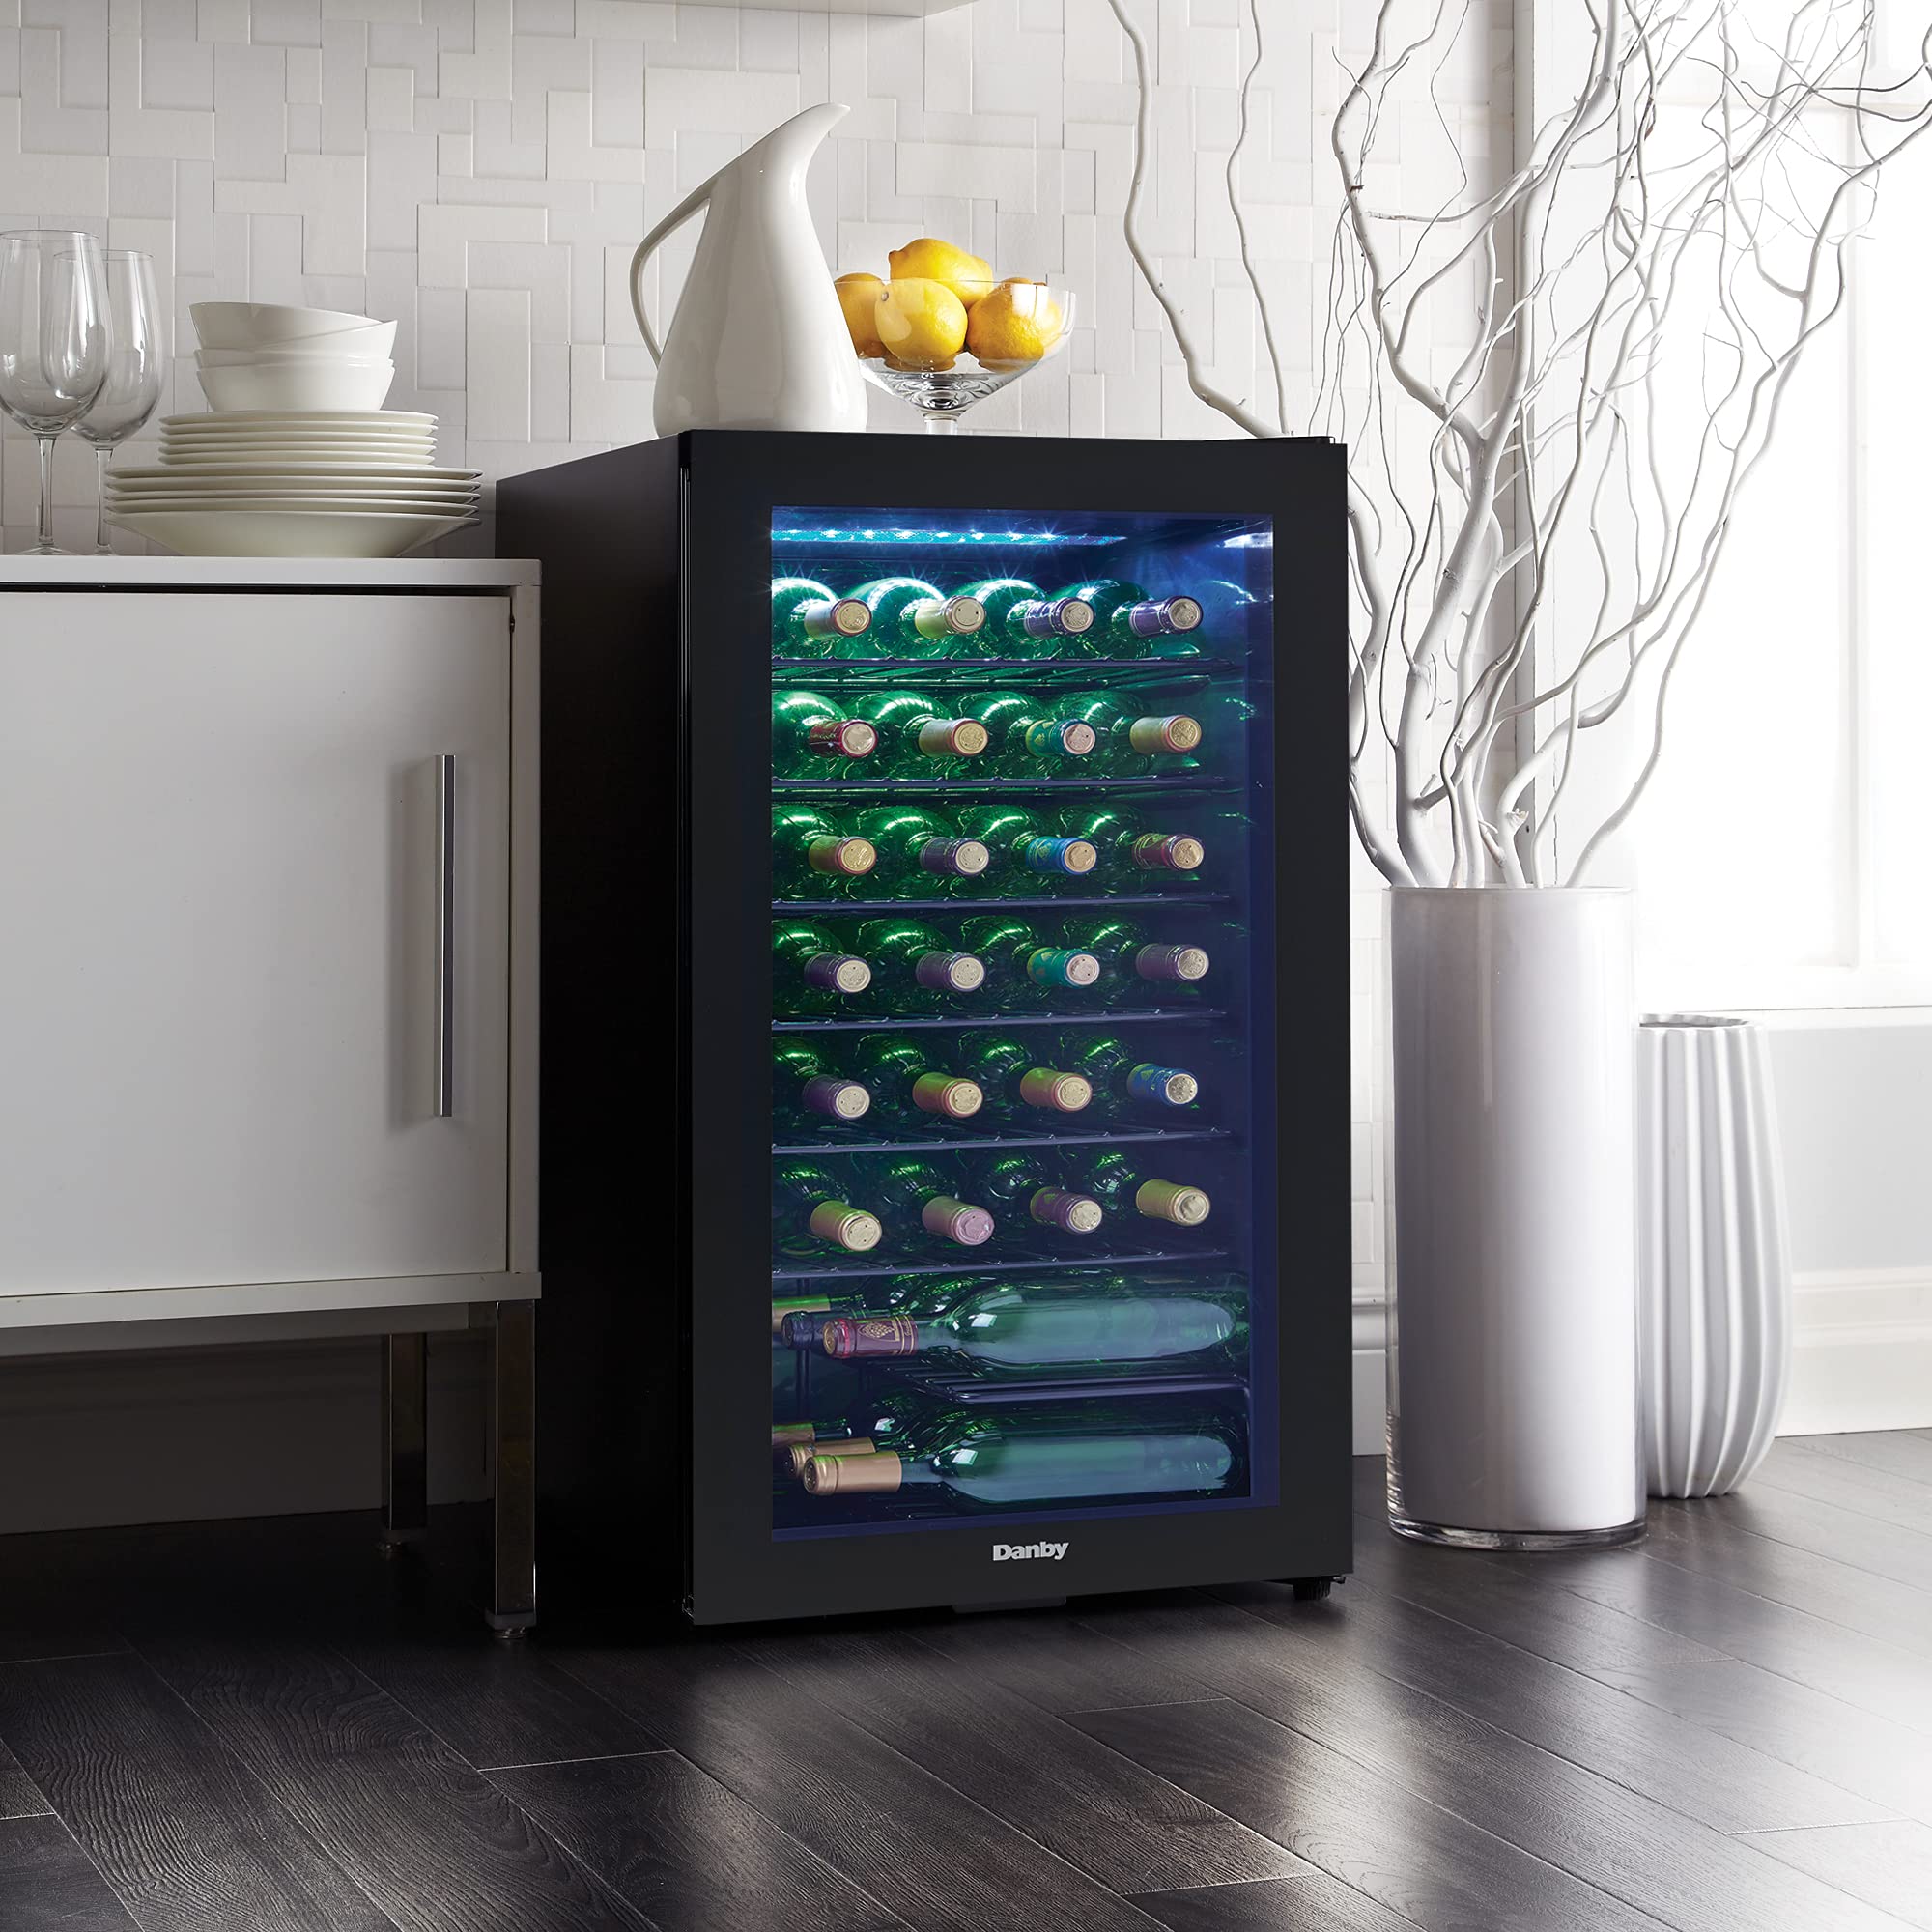 Danby DWC036A2BDB-6 3.3 Cu. Ft. Free Standing Wine Cooler, Holds 36 Bottles, Single Zone Drinks Fridge with Glass Door-Beverage Chiller for Kitchen, Home Bar, in Black